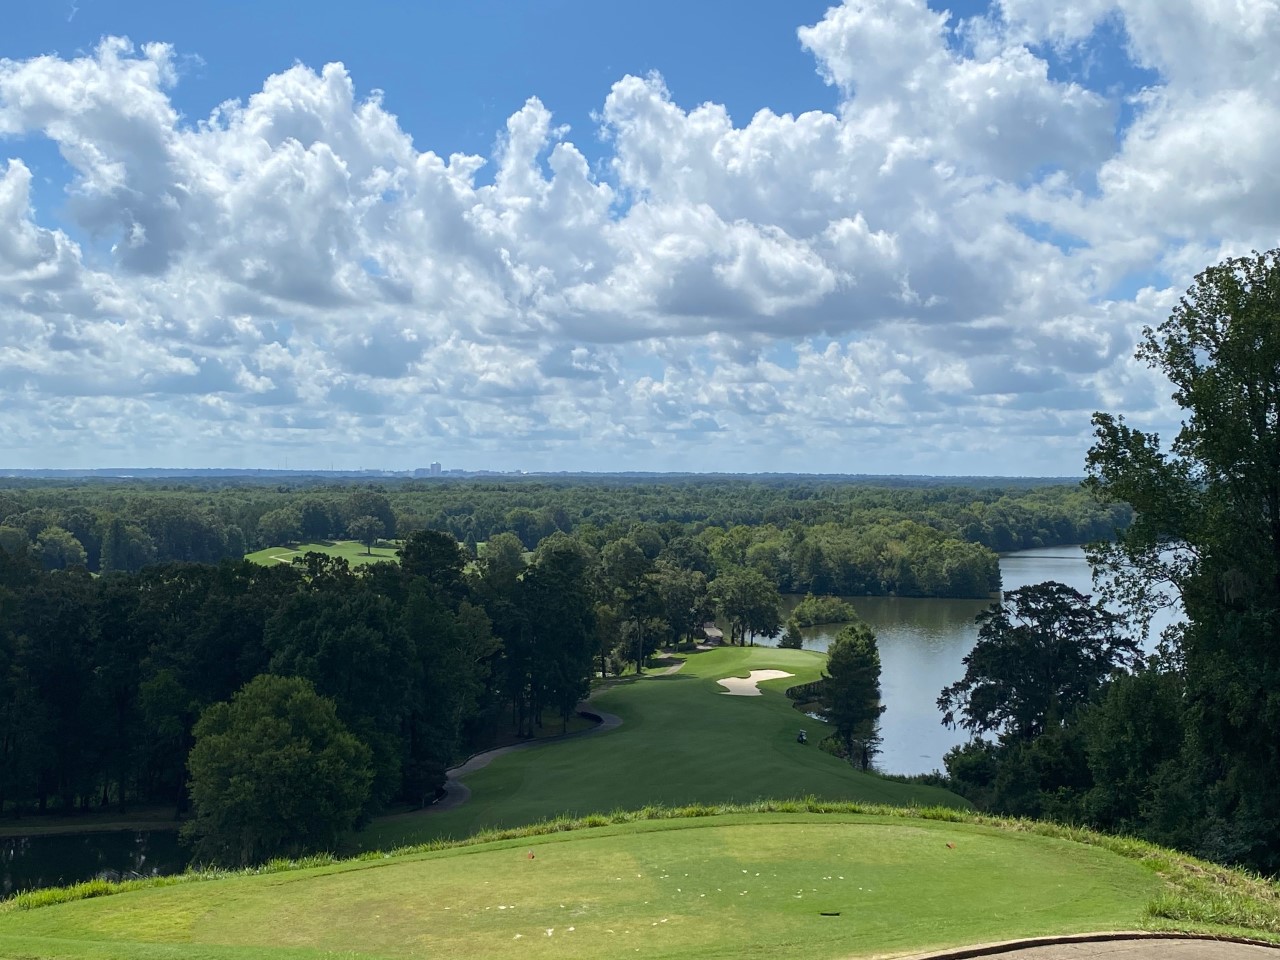 Hole No. 1 on the Judge is 200 feet above the fairway overlooking the Alabama River